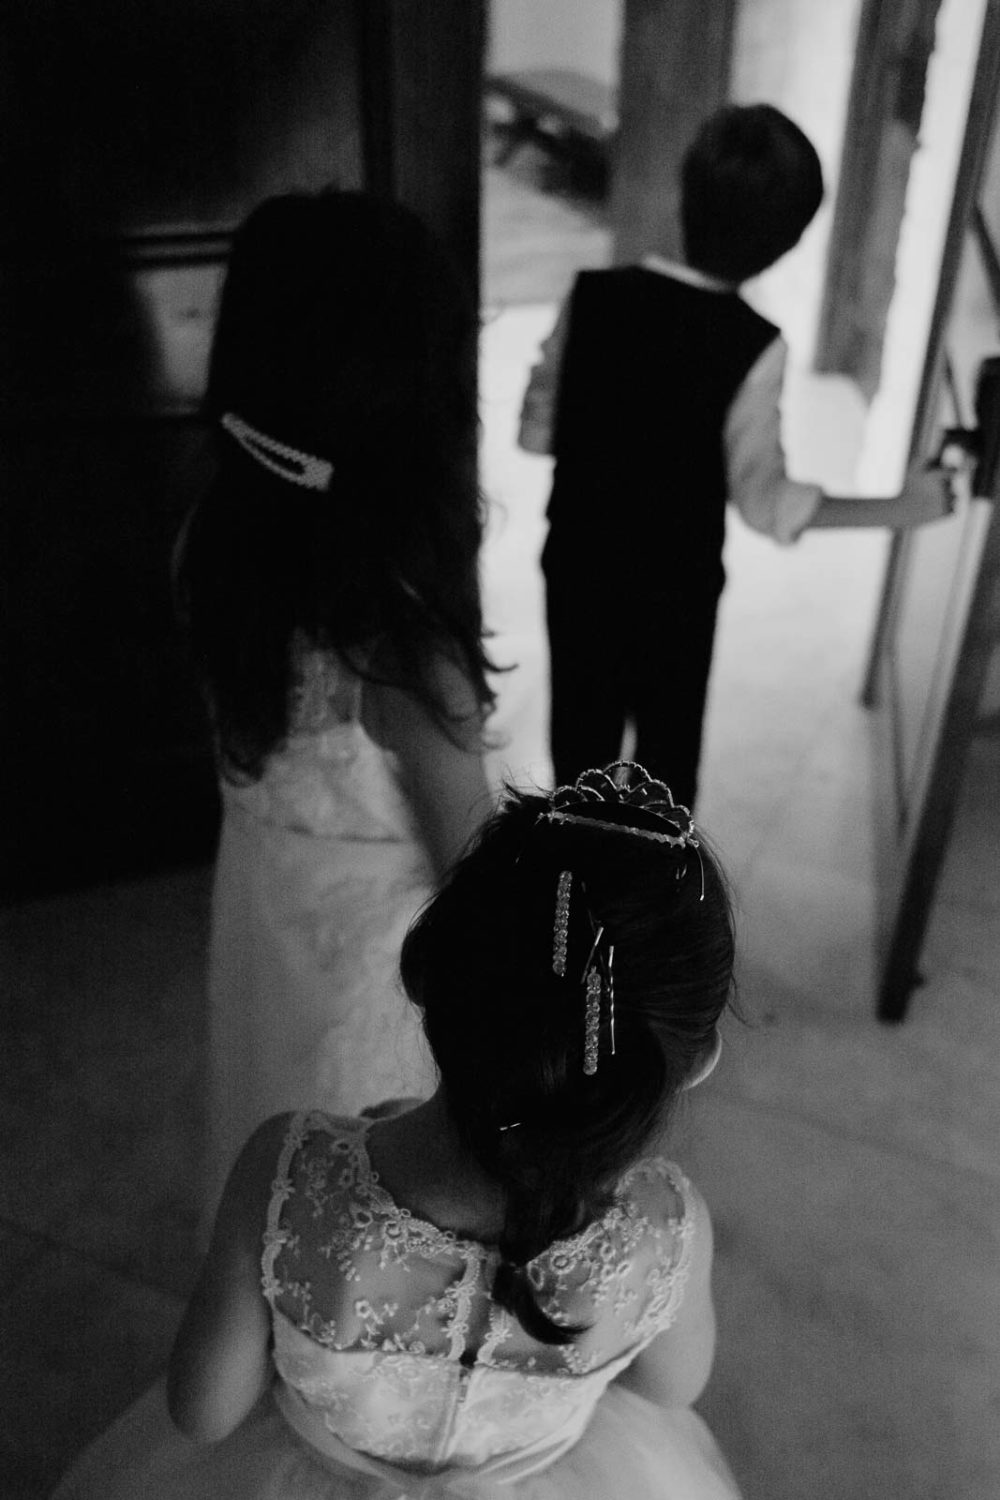 geometric patterns in a beautiful image taken from behind the flower girl and ring bearer